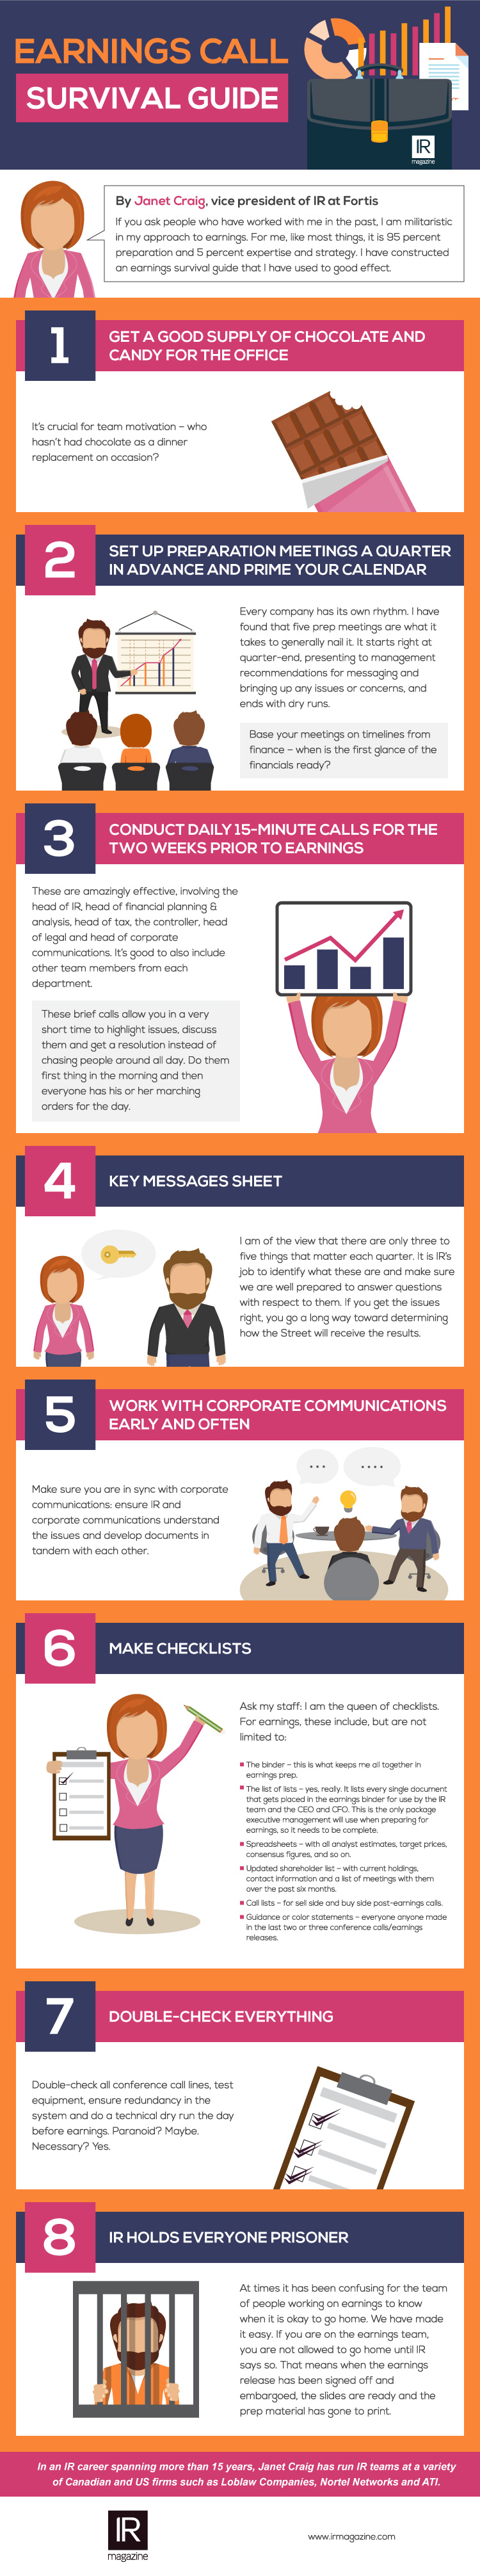 Infographic earnings call survival guide